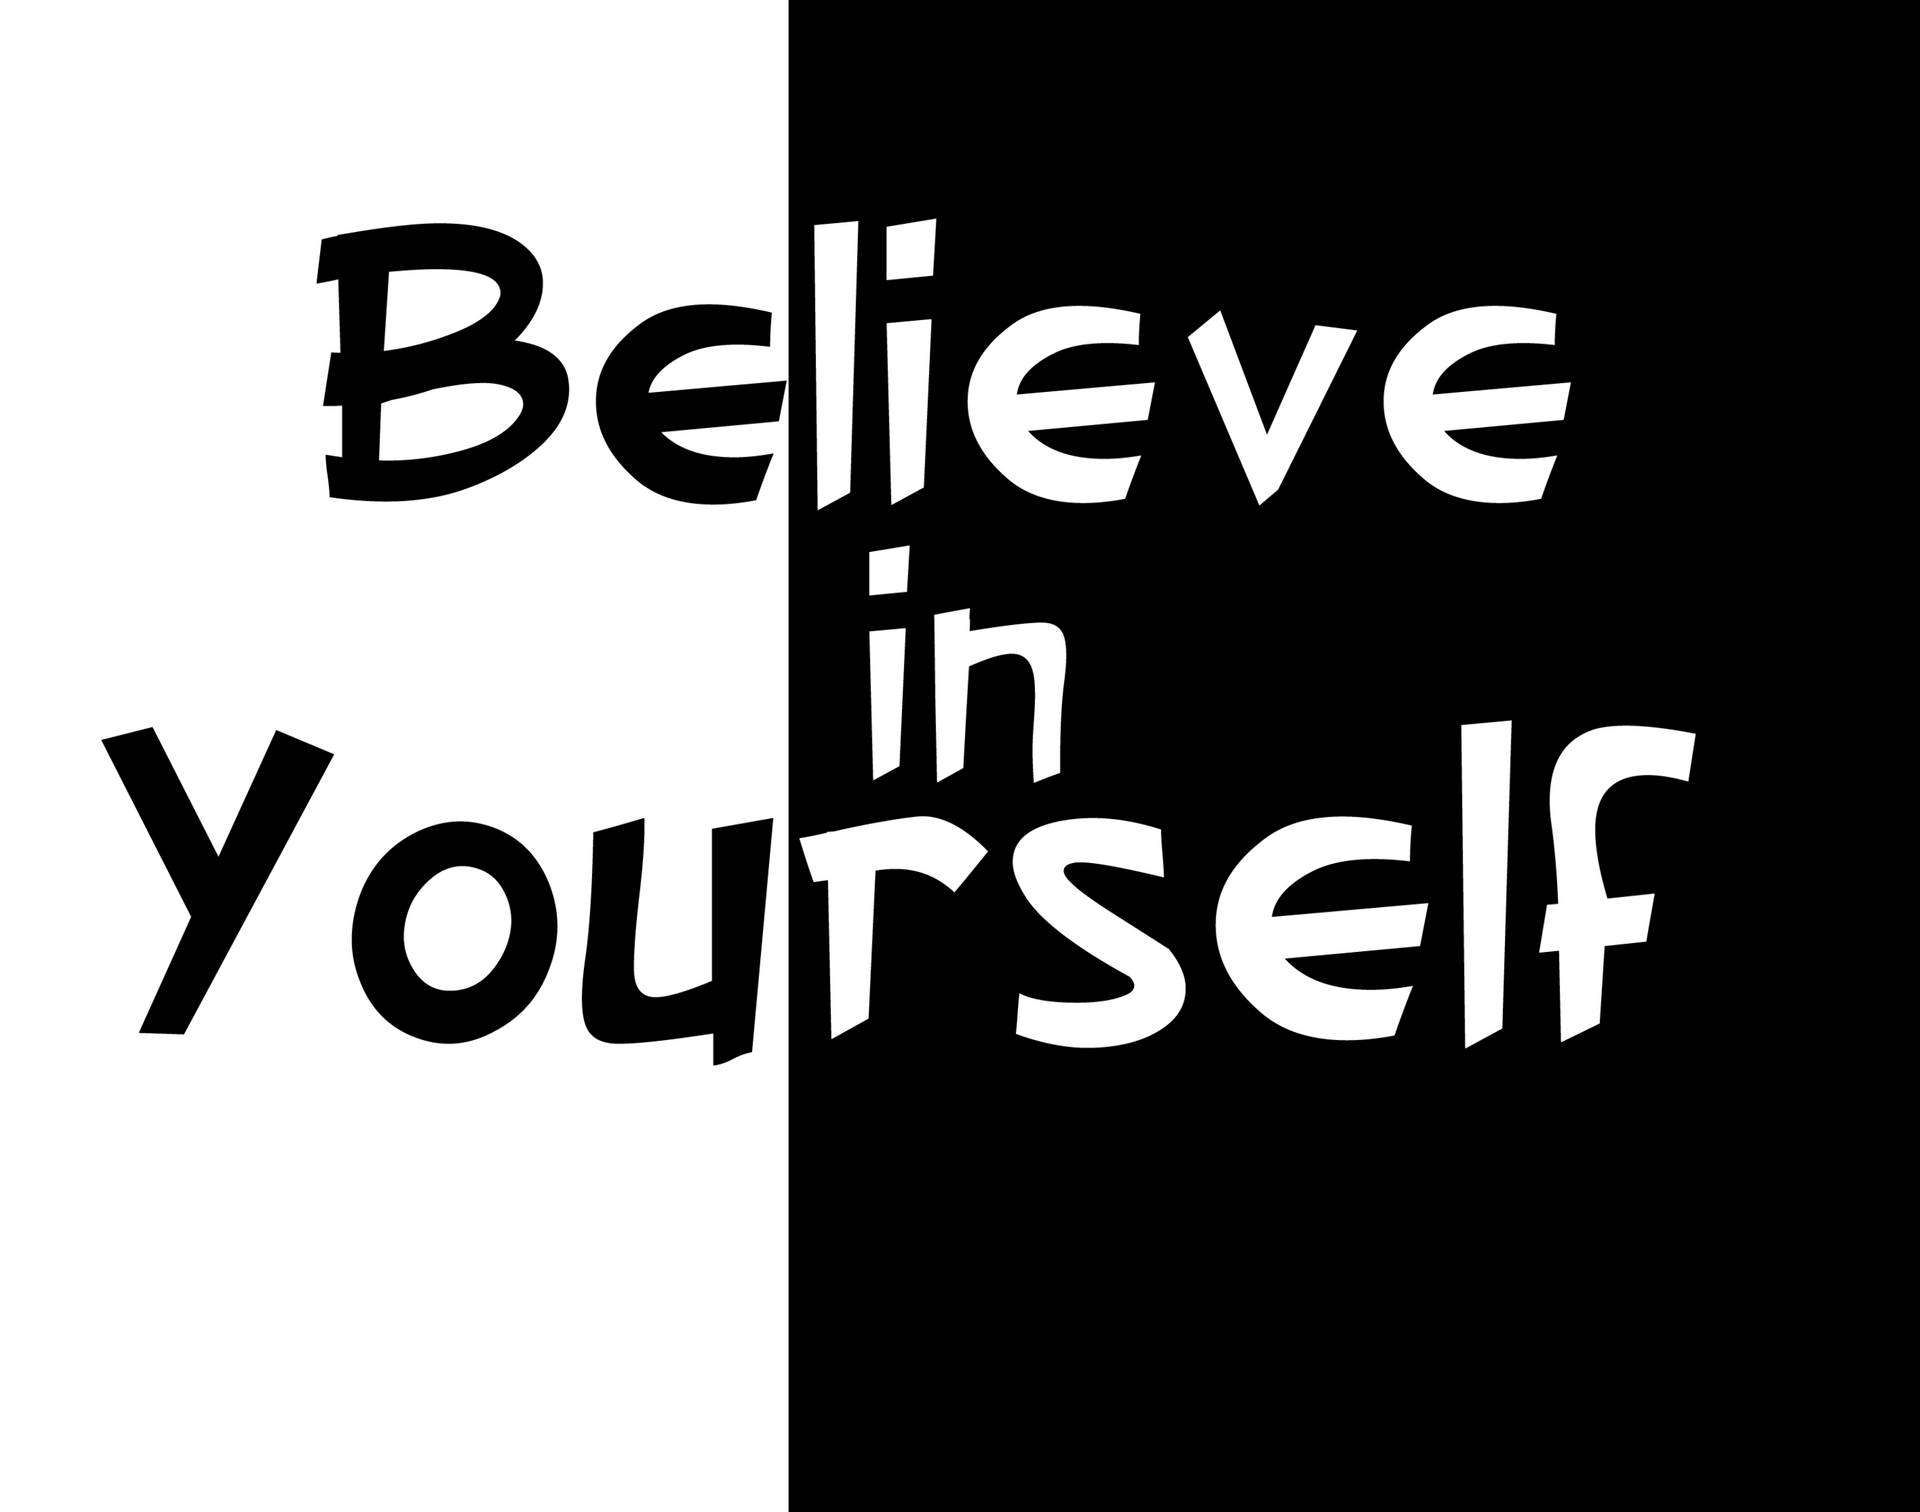 Believing Yourself Text